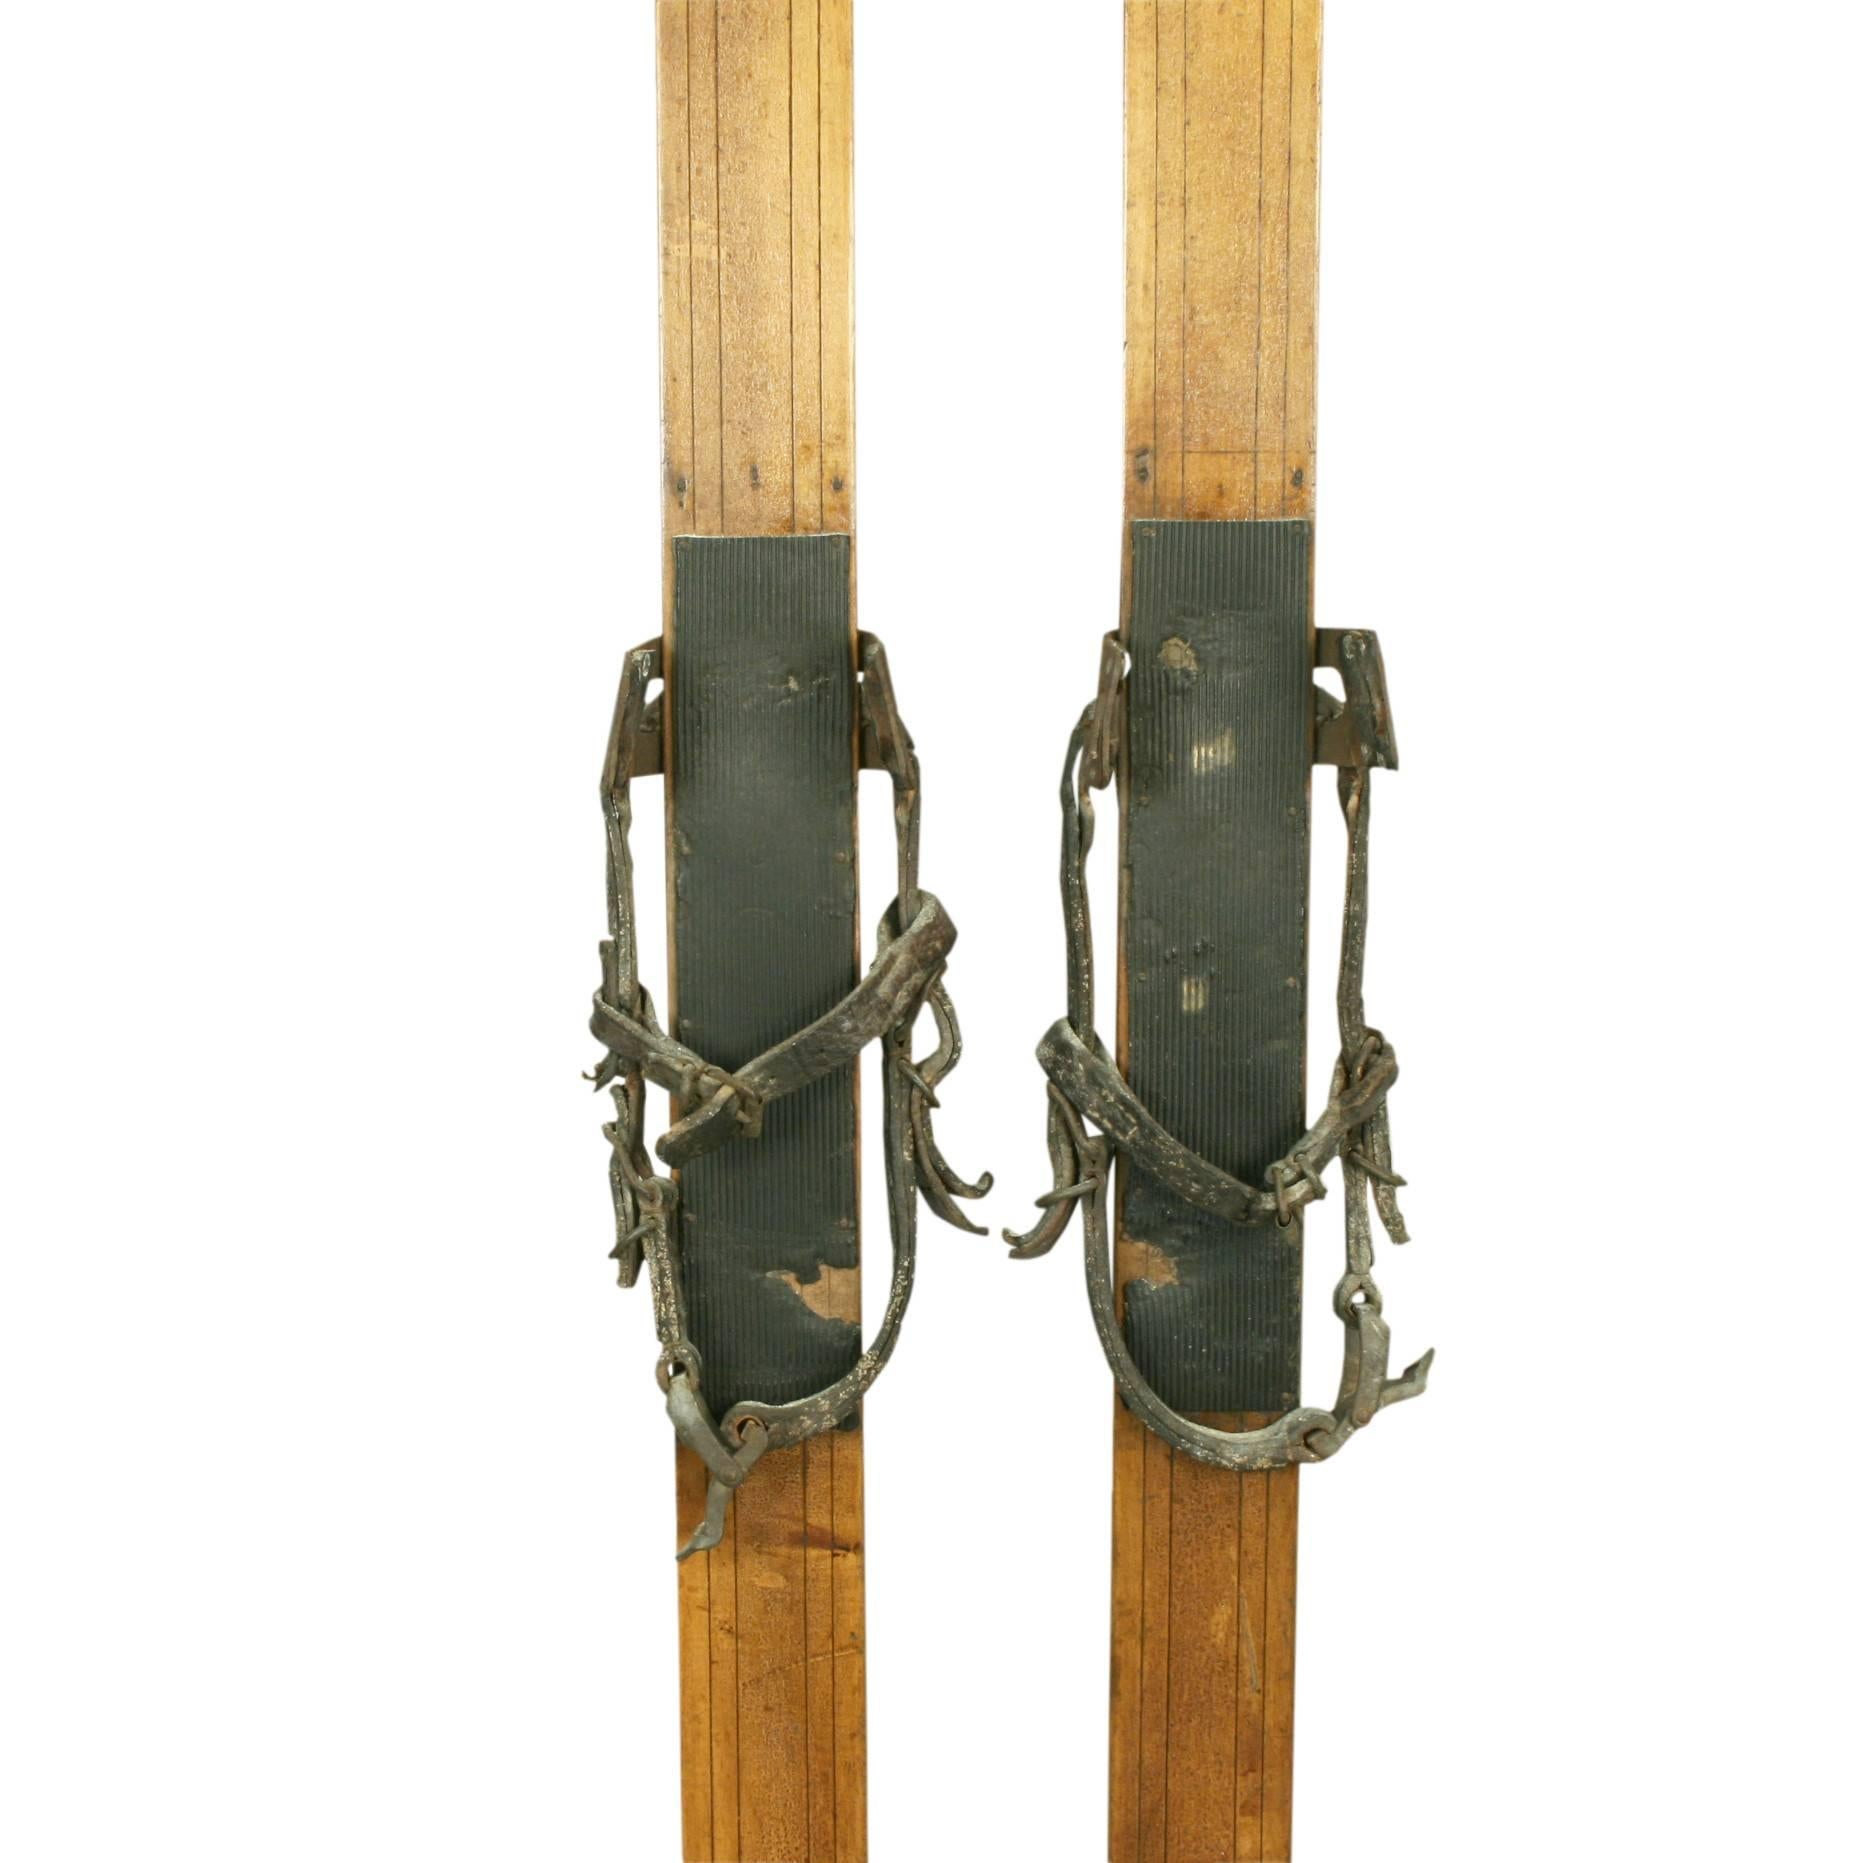 A pair of light colored ash skis with rubber footplates, galvanized toe bindings lined with leather and leather heel straps (Huitfeldt bindings). The top sides with decorative grooving and the running surfaces with a single groove. 

Ski poles are